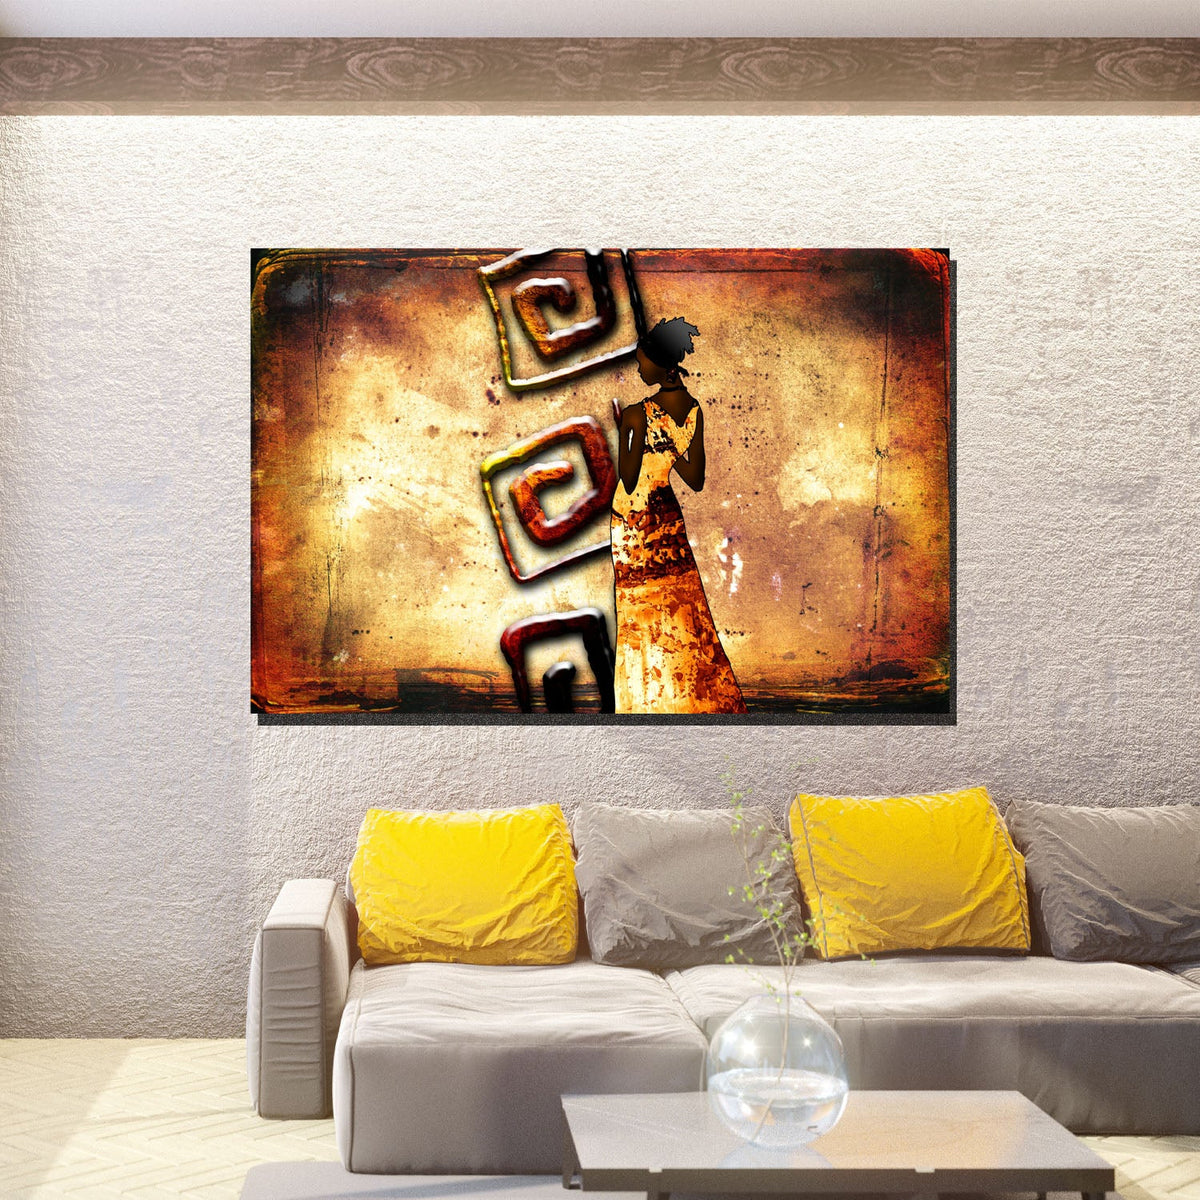 https://cdn.shopify.com/s/files/1/0387/9986/8044/products/SolitudeCanvasArtPrintStretched-4.jpg